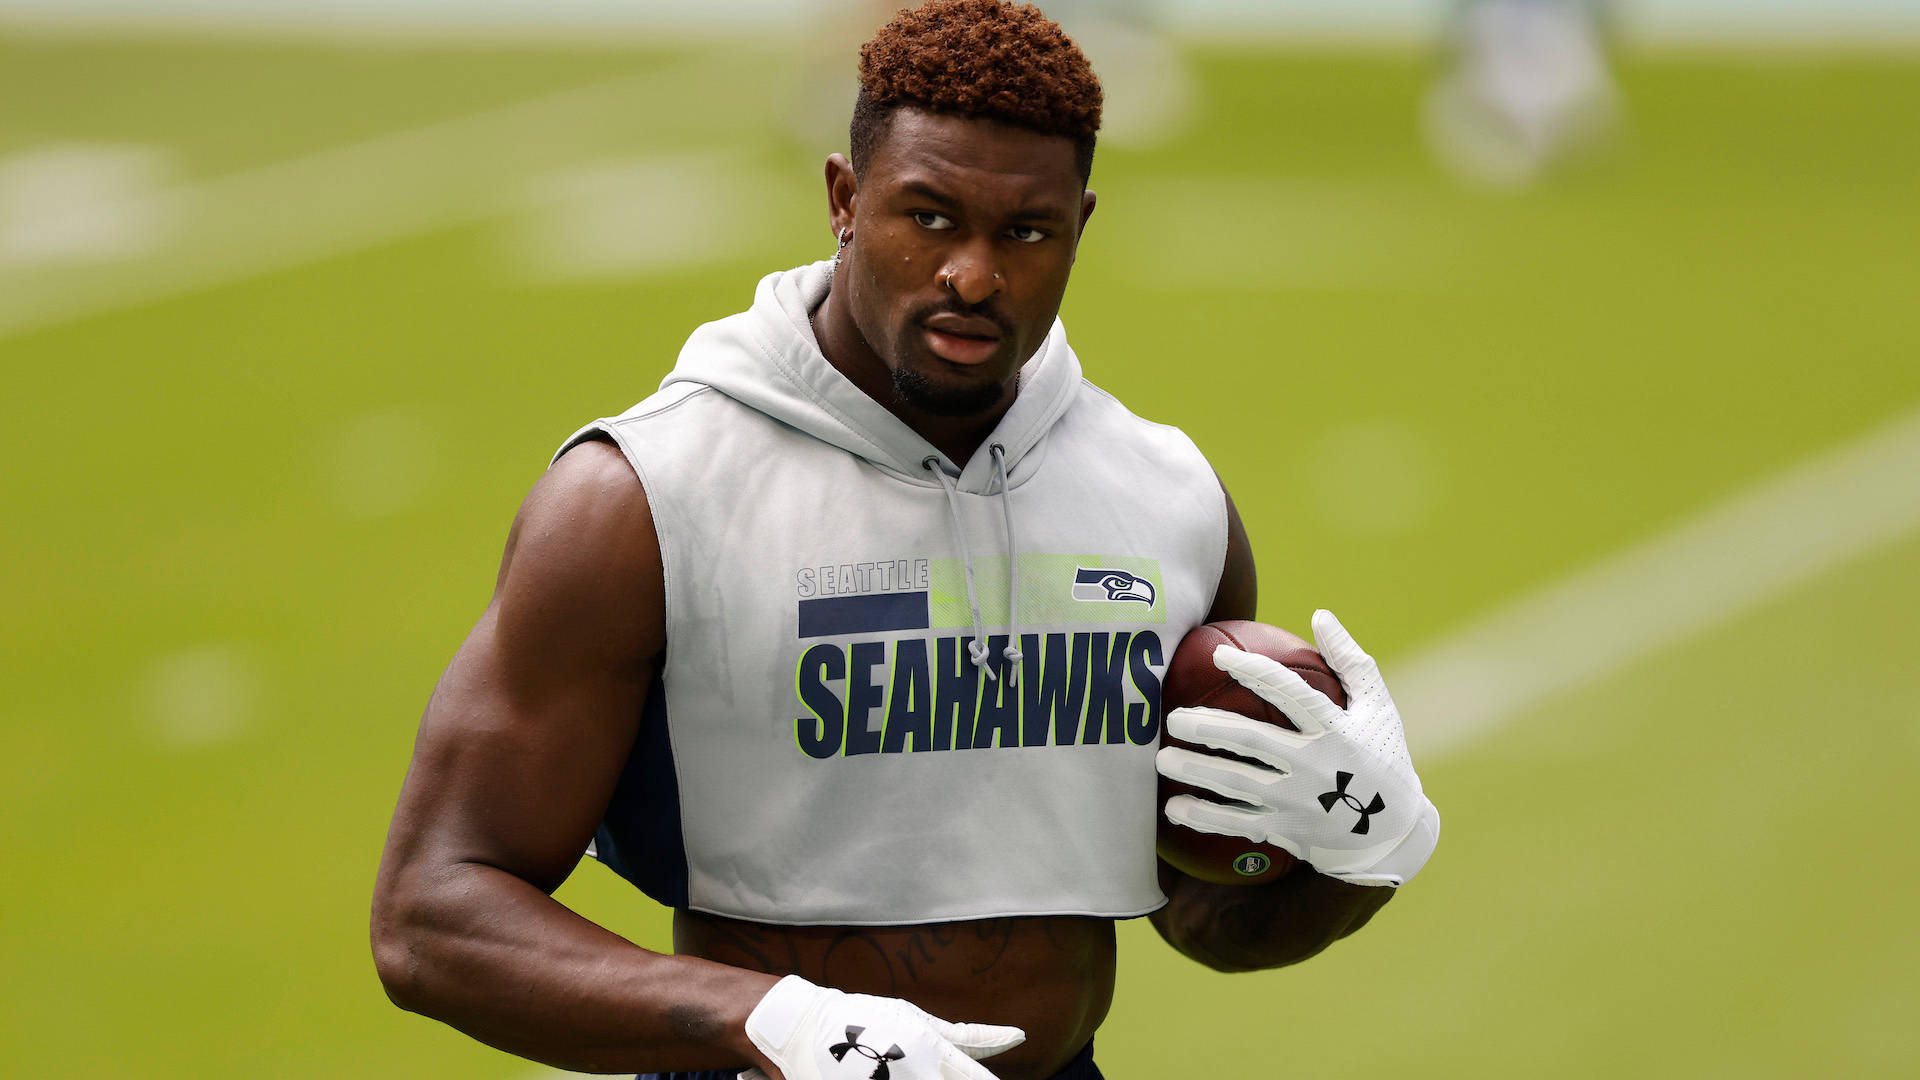 Seattle Seahawks’ Star Dk Metcalf In Casual White Attire Background